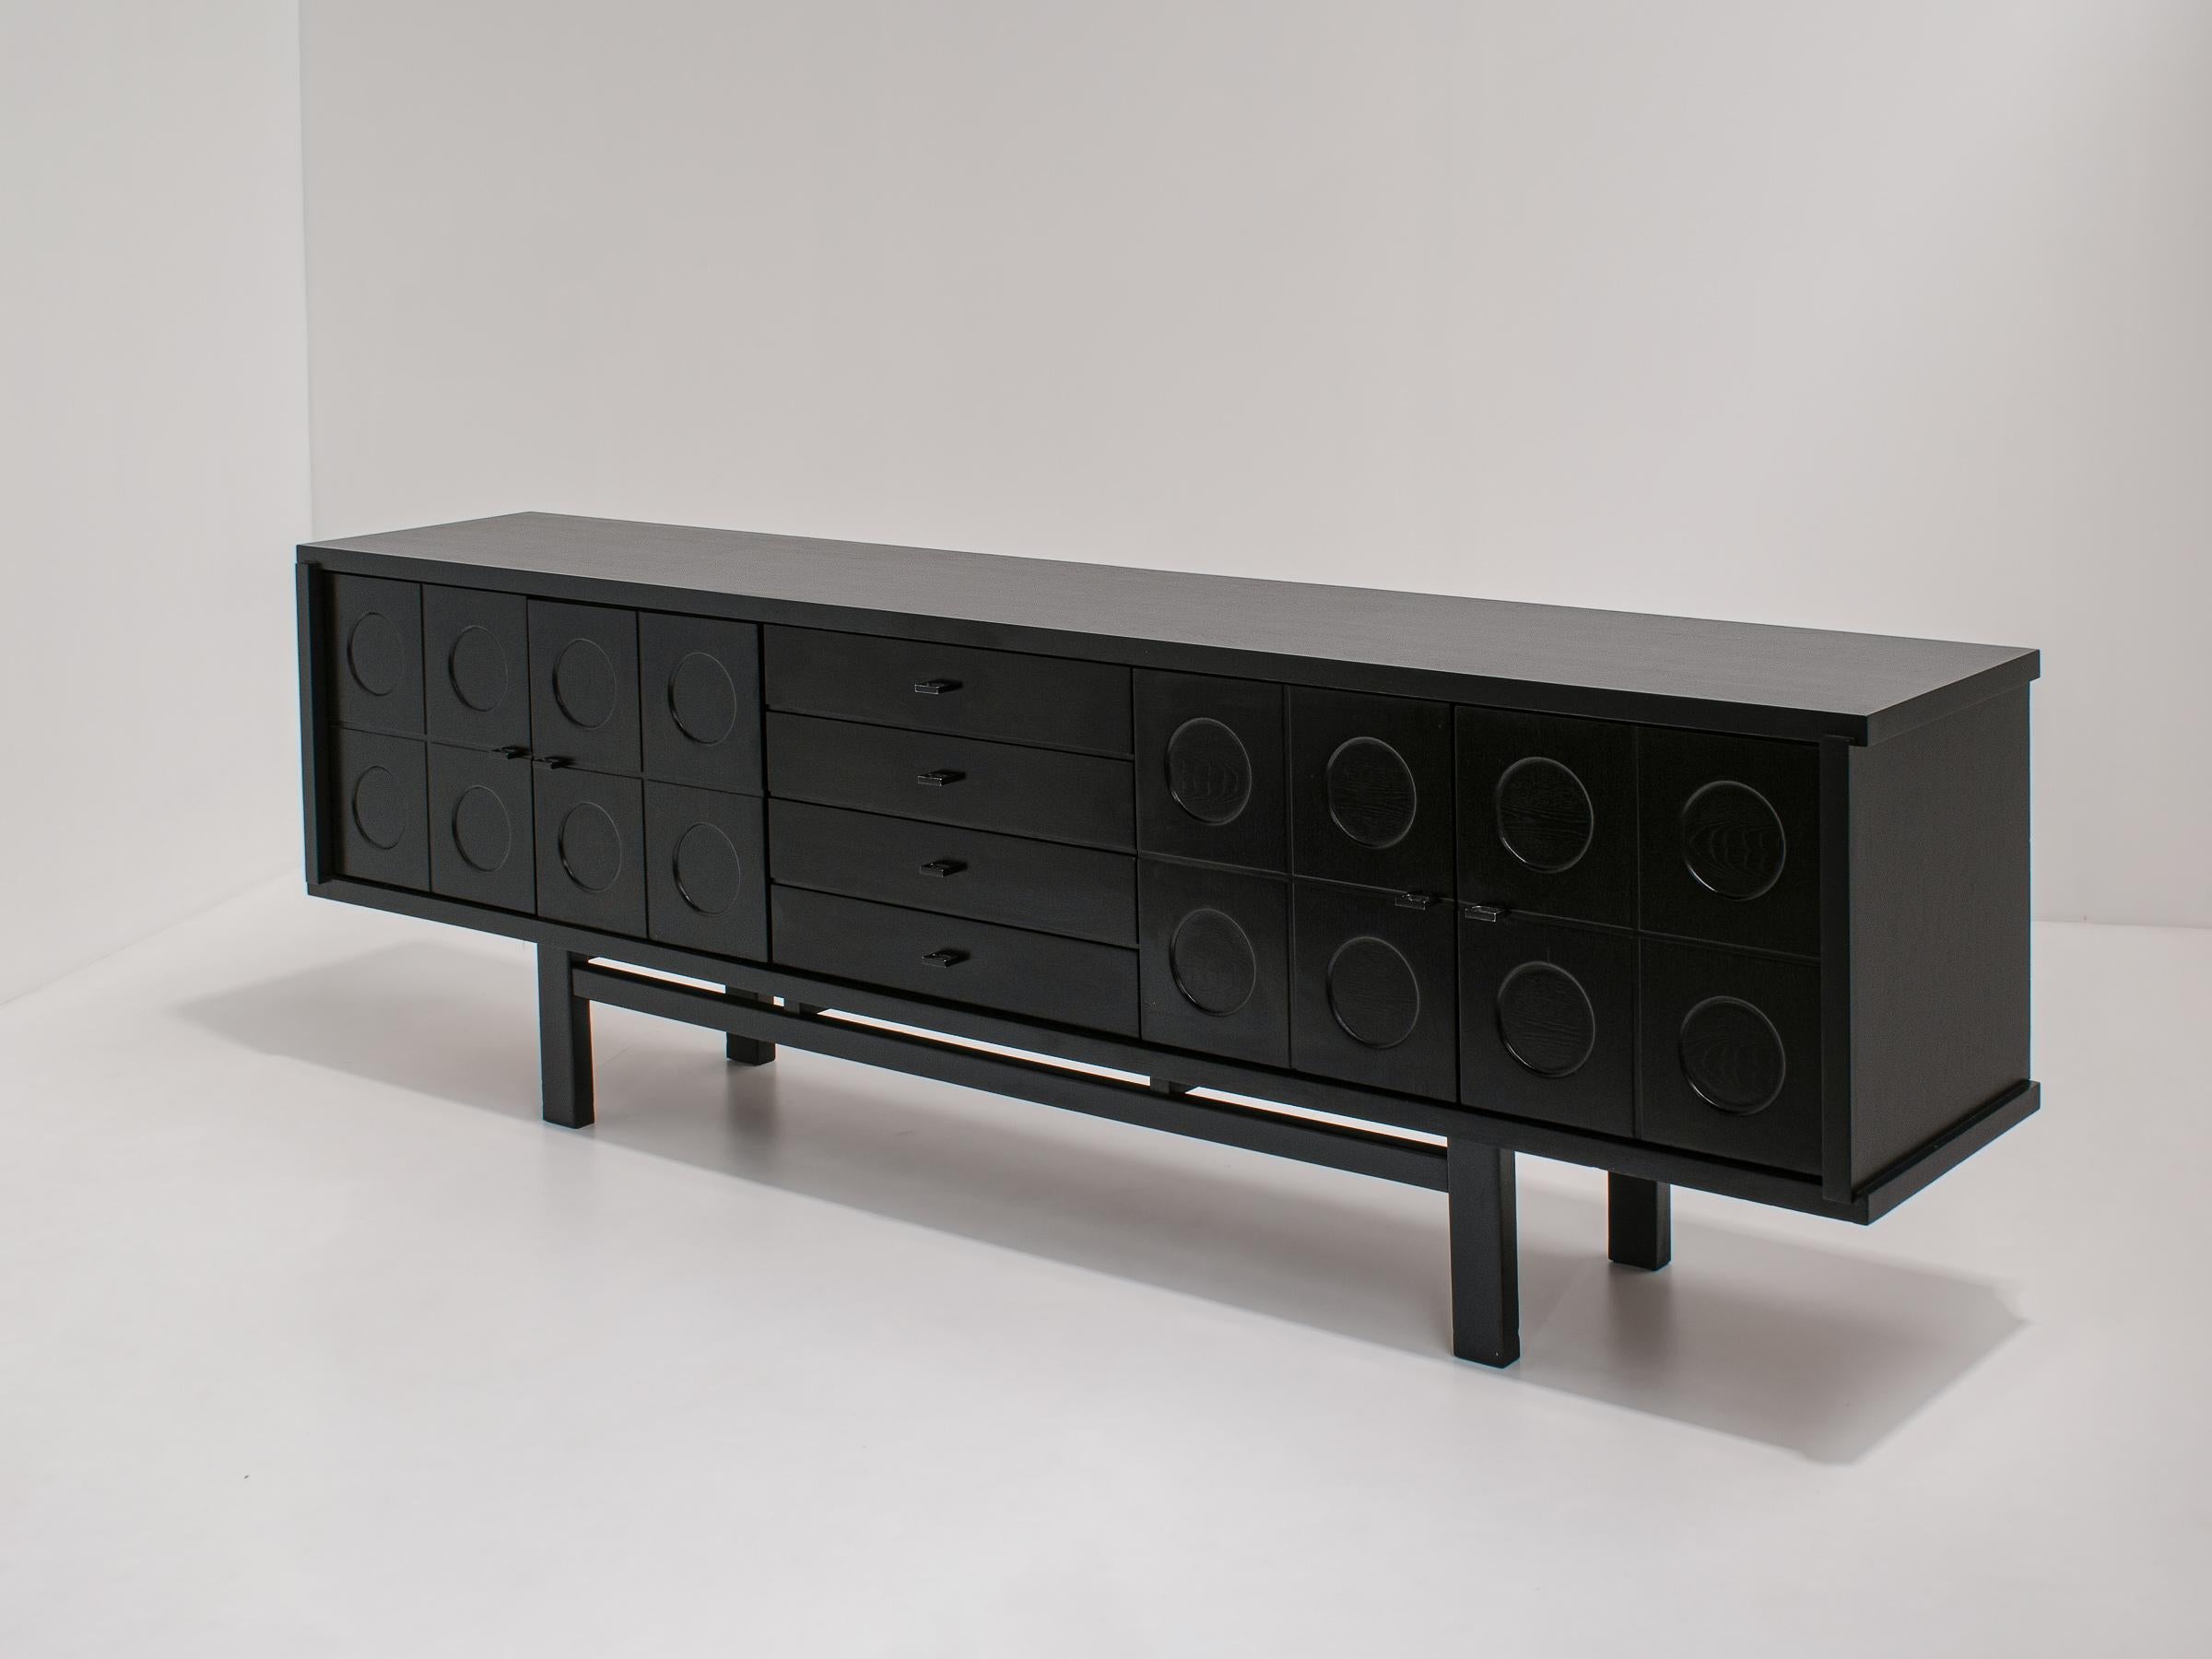 Stunning brutalist sideboard in black lacquered oak, Belgium 1970s. Often attributed to Belgian manufacturer De Coene.

It is a very large item, but because of the added legs, it manages to give the item a more airy look than the usual brutalist